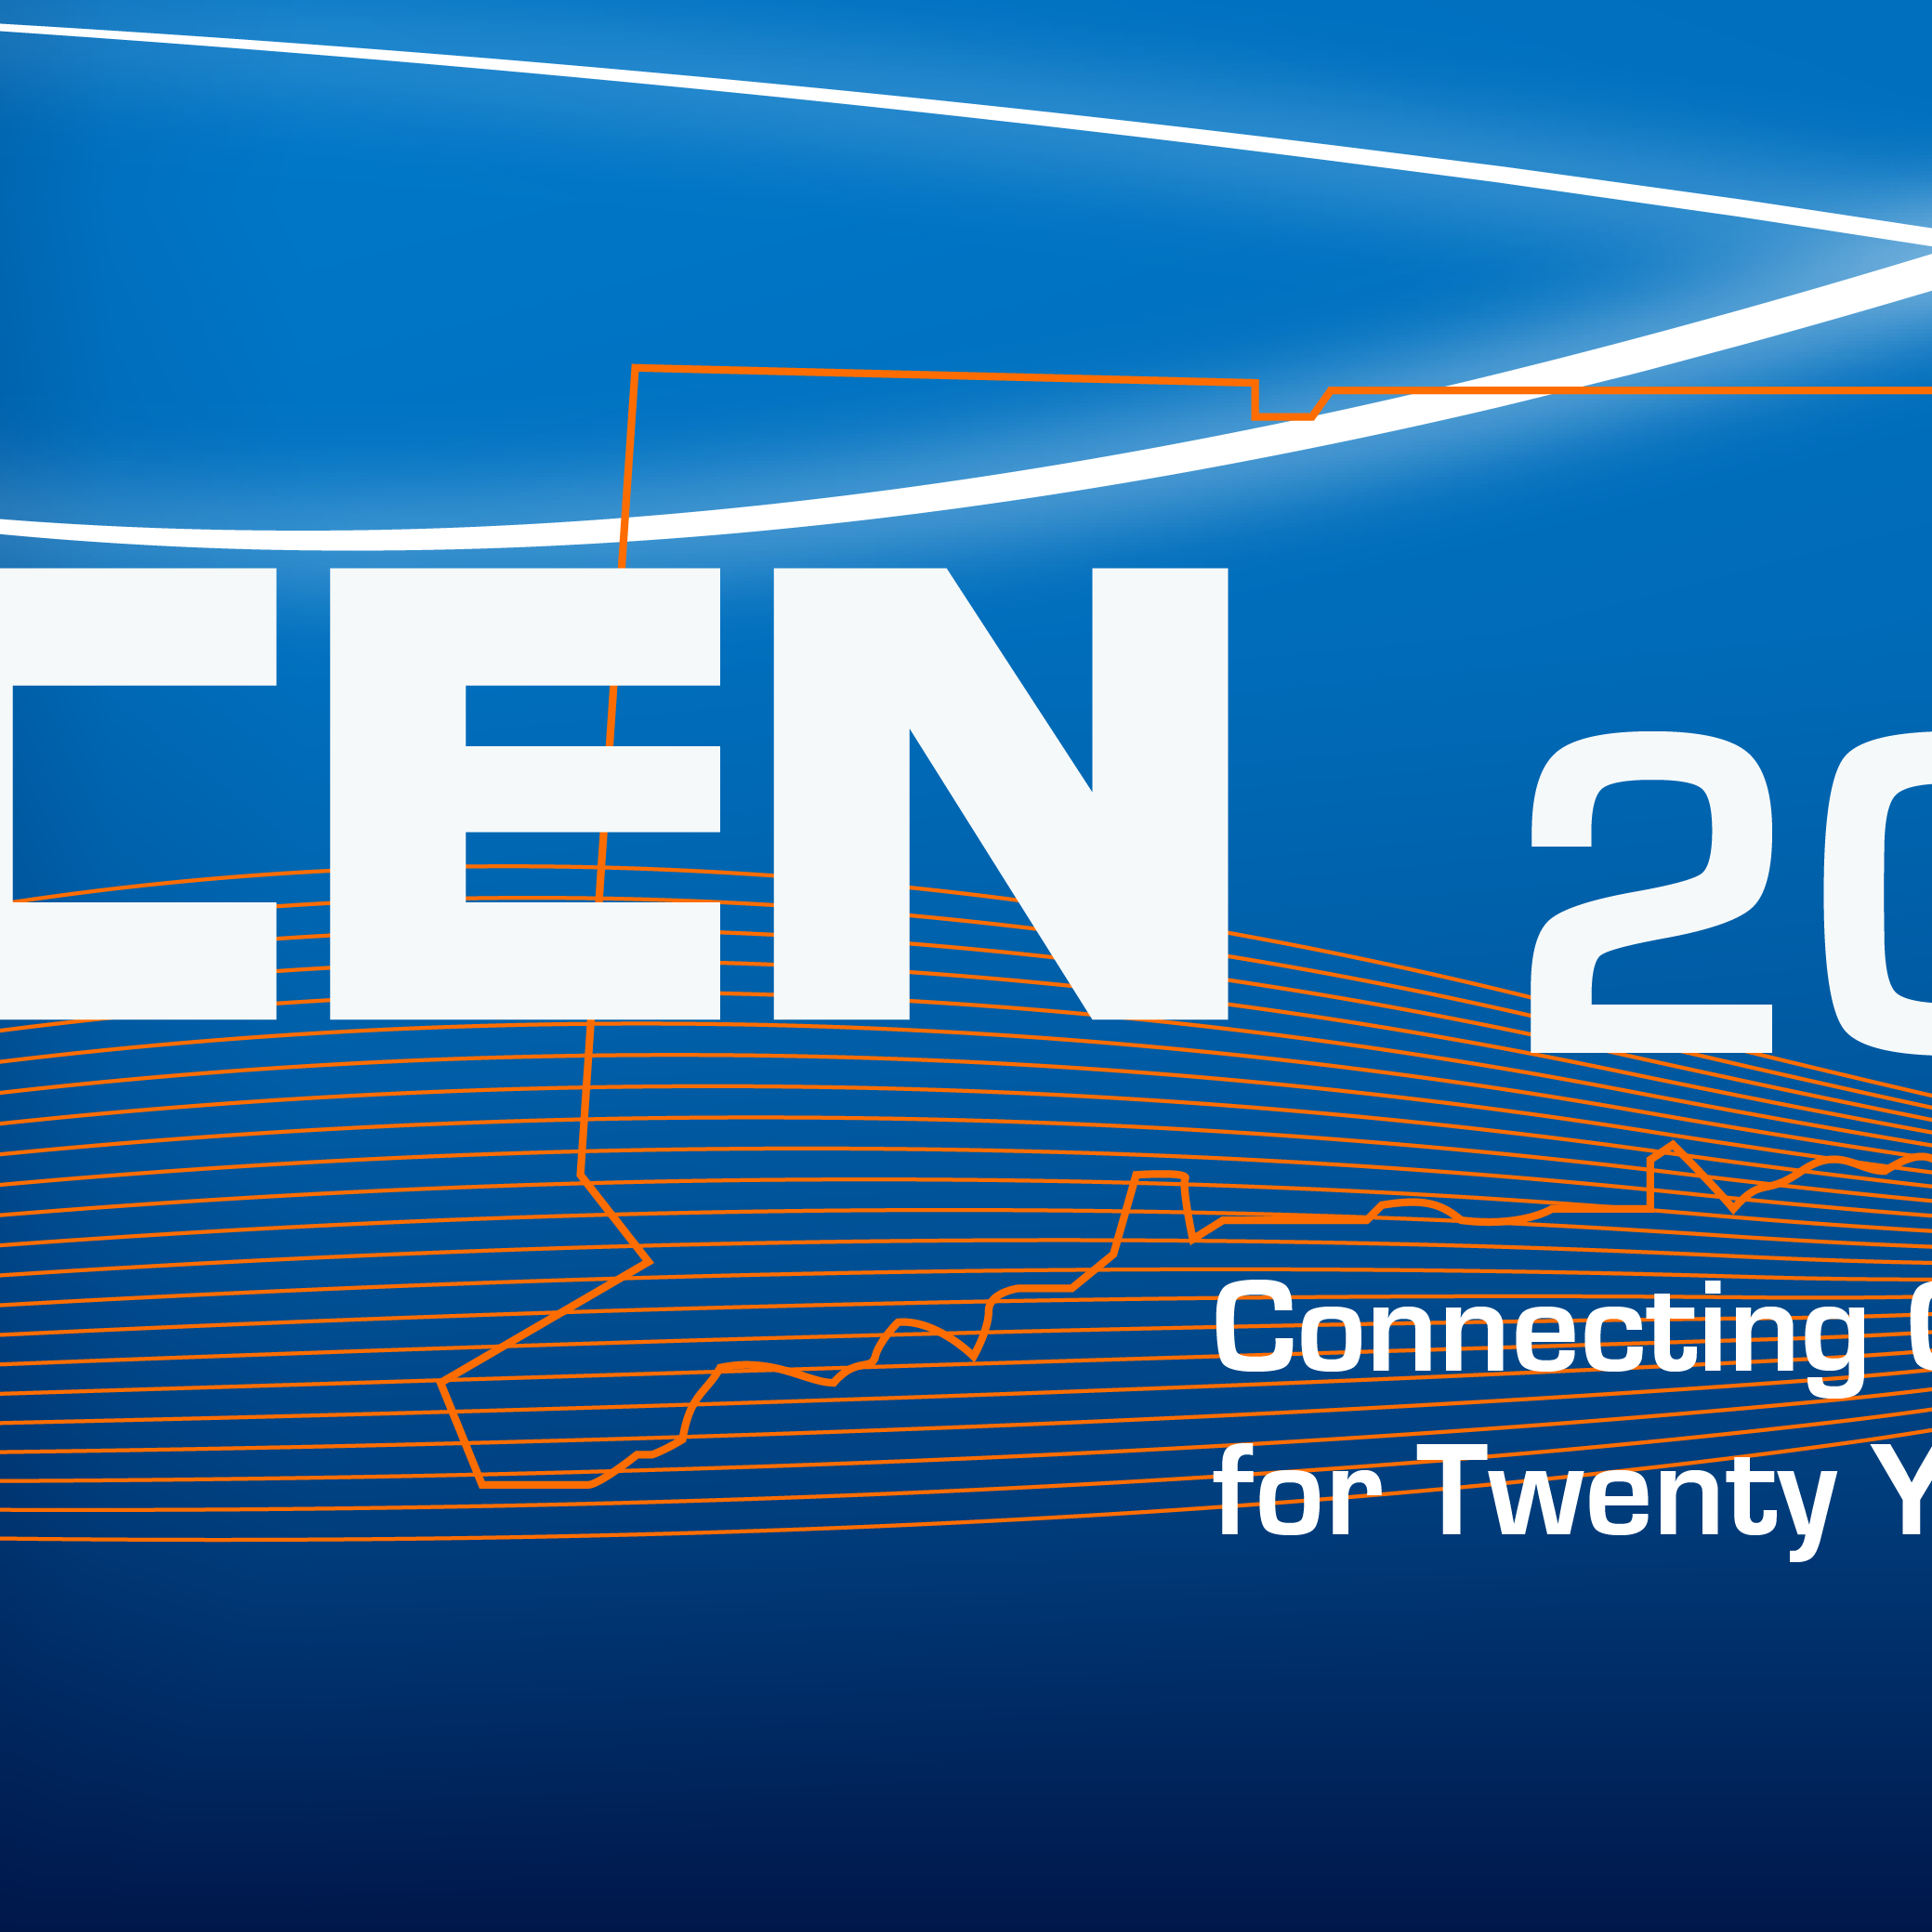 CEN 2020 conference image